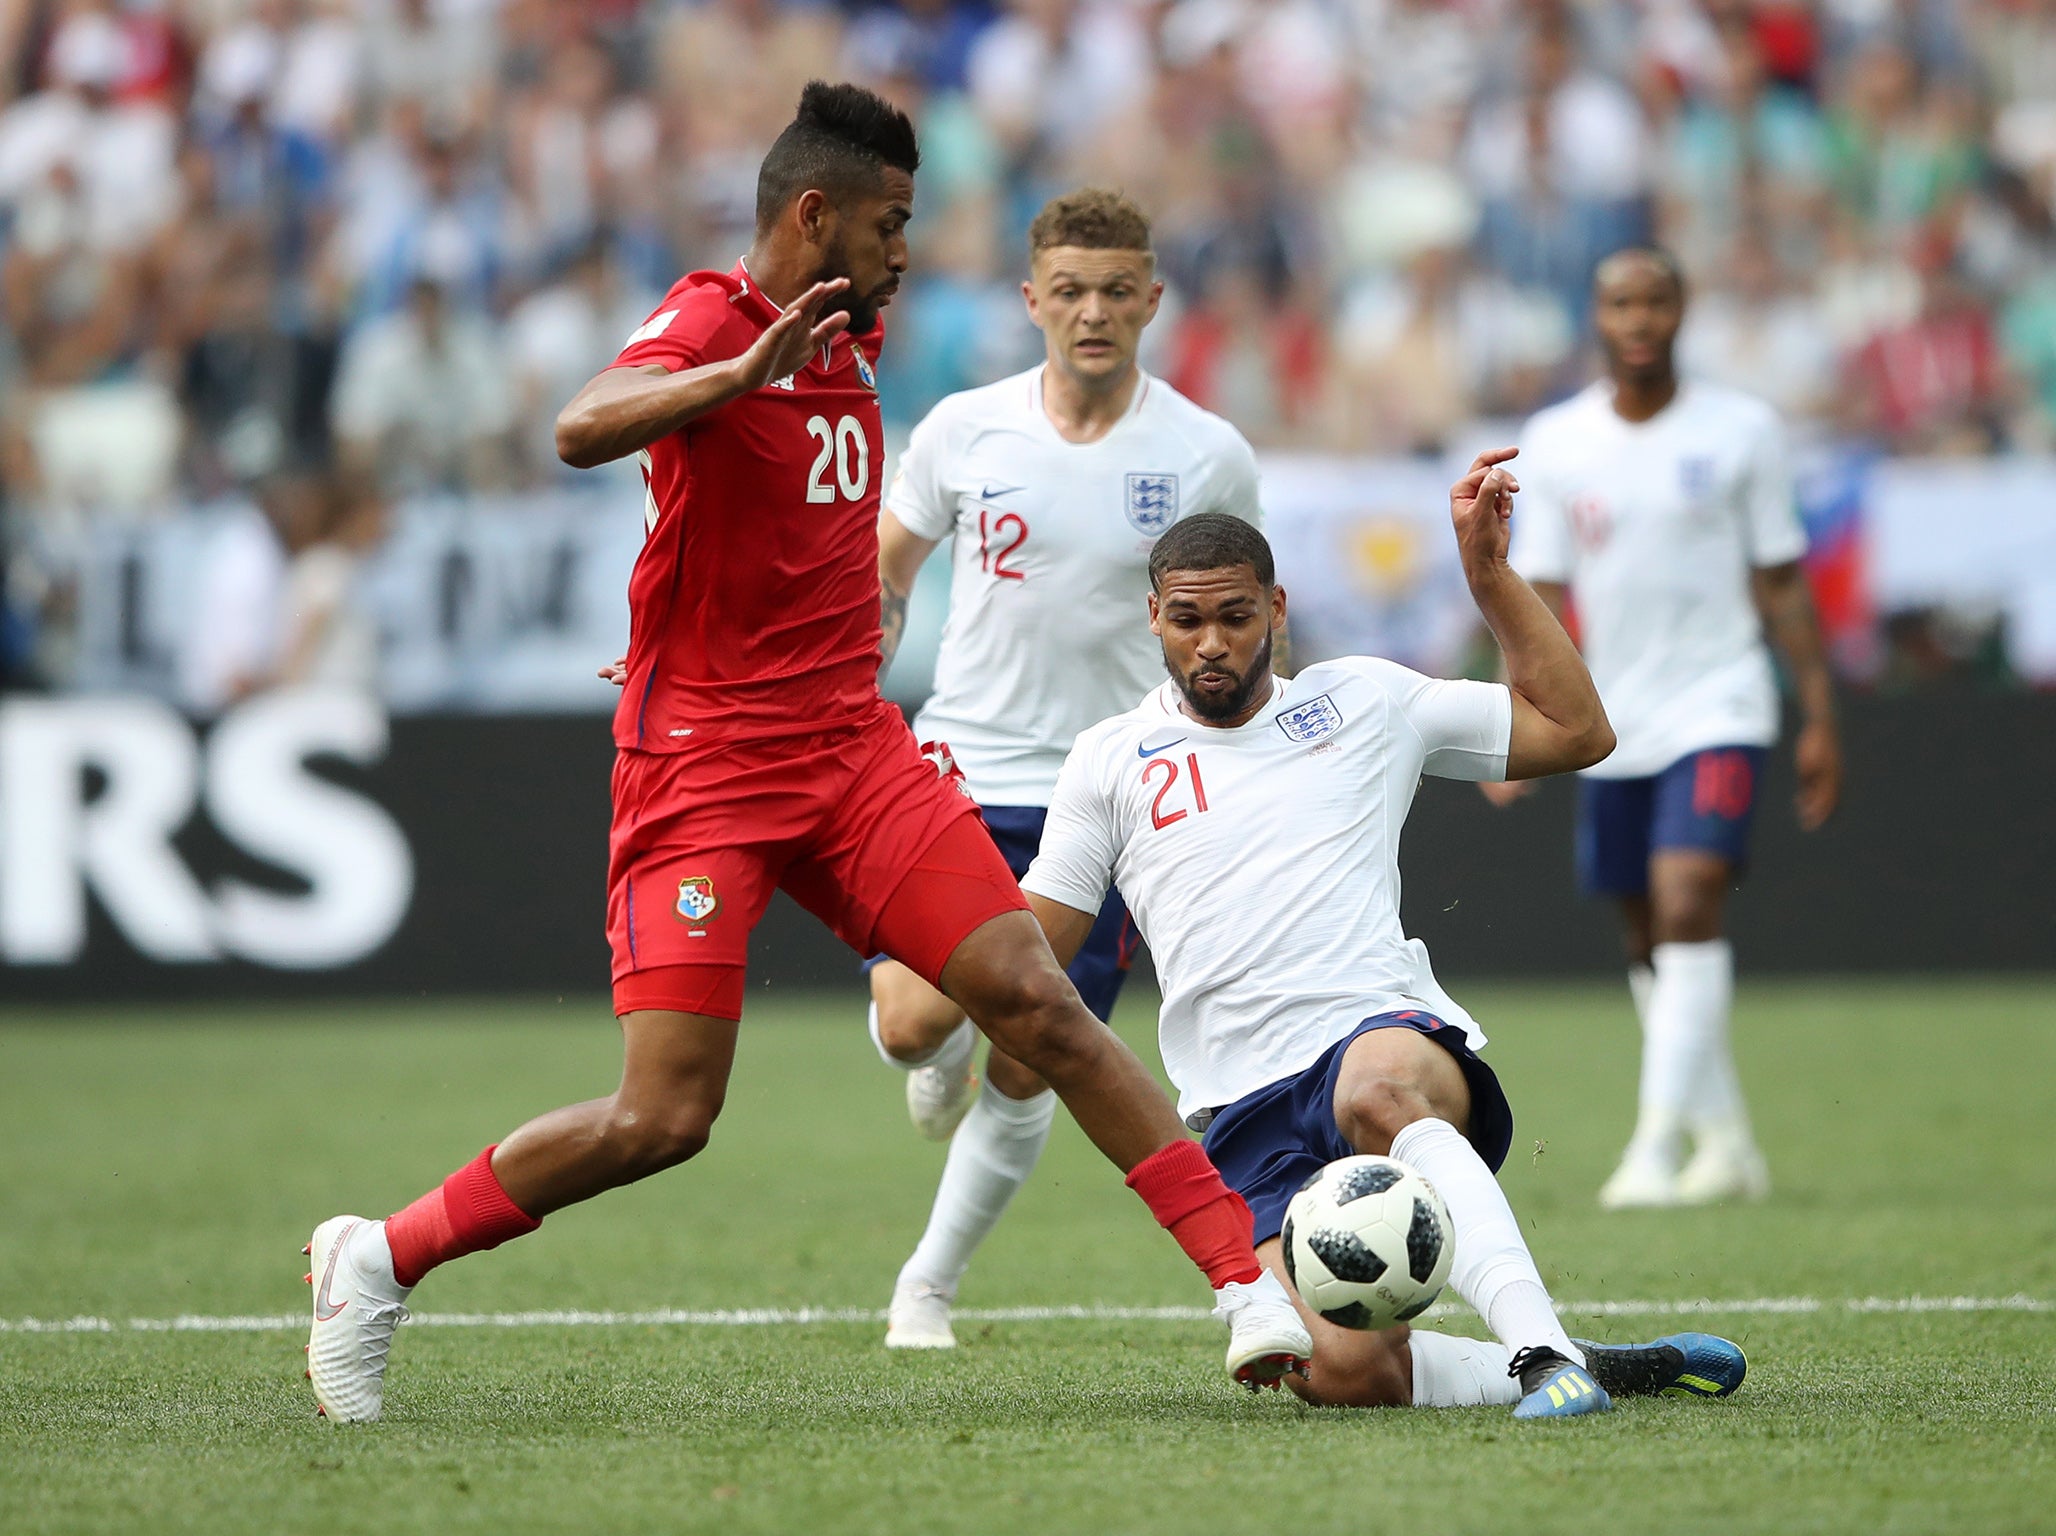 England World Cup 2018 fair play table: Why yellow and red cards could decide which team tops Group G